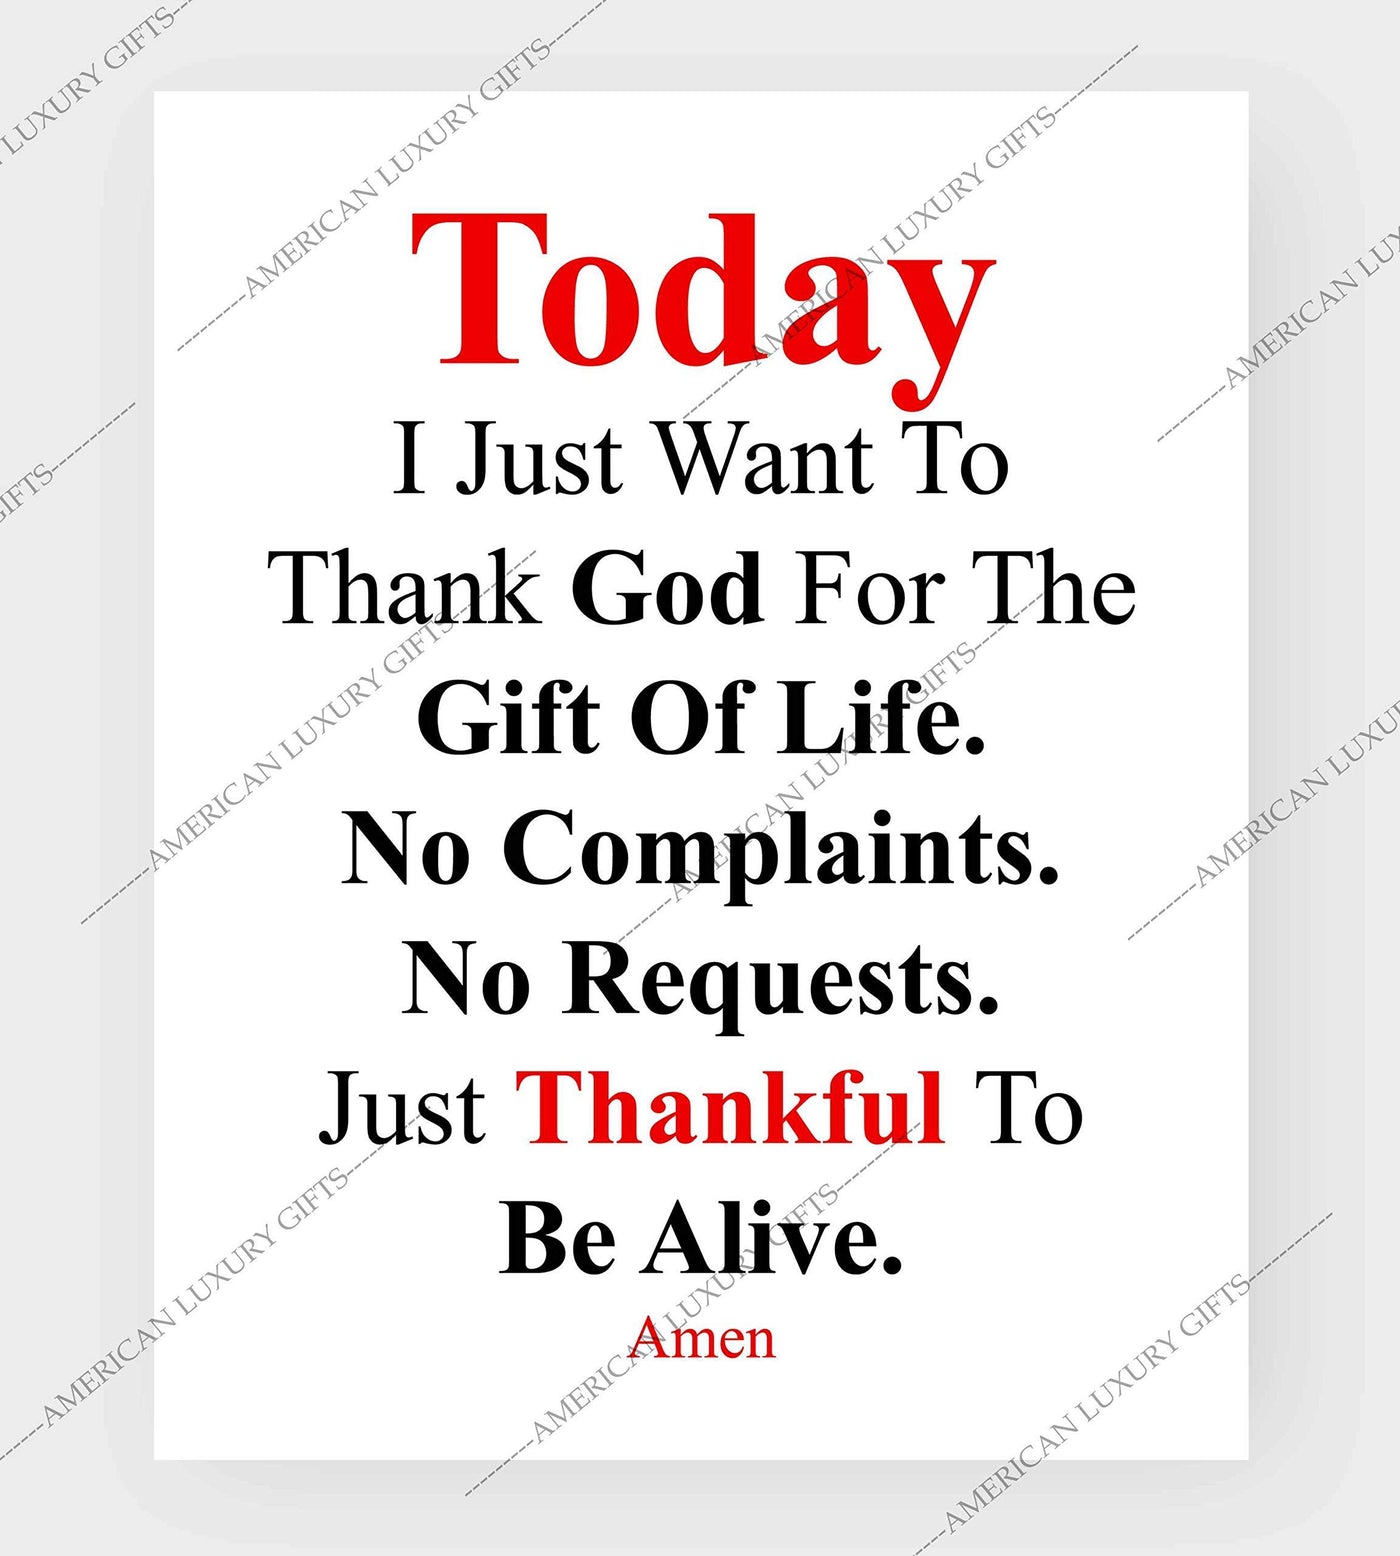 Today I Just Want To Thank God Prayer Wall Art Sign -8 x 10" Modern Typographic Poster Print-Ready to Frame. Inspirational Decor for Home-Office-Church. Perfect Christian Gift! Give Thanks to God!